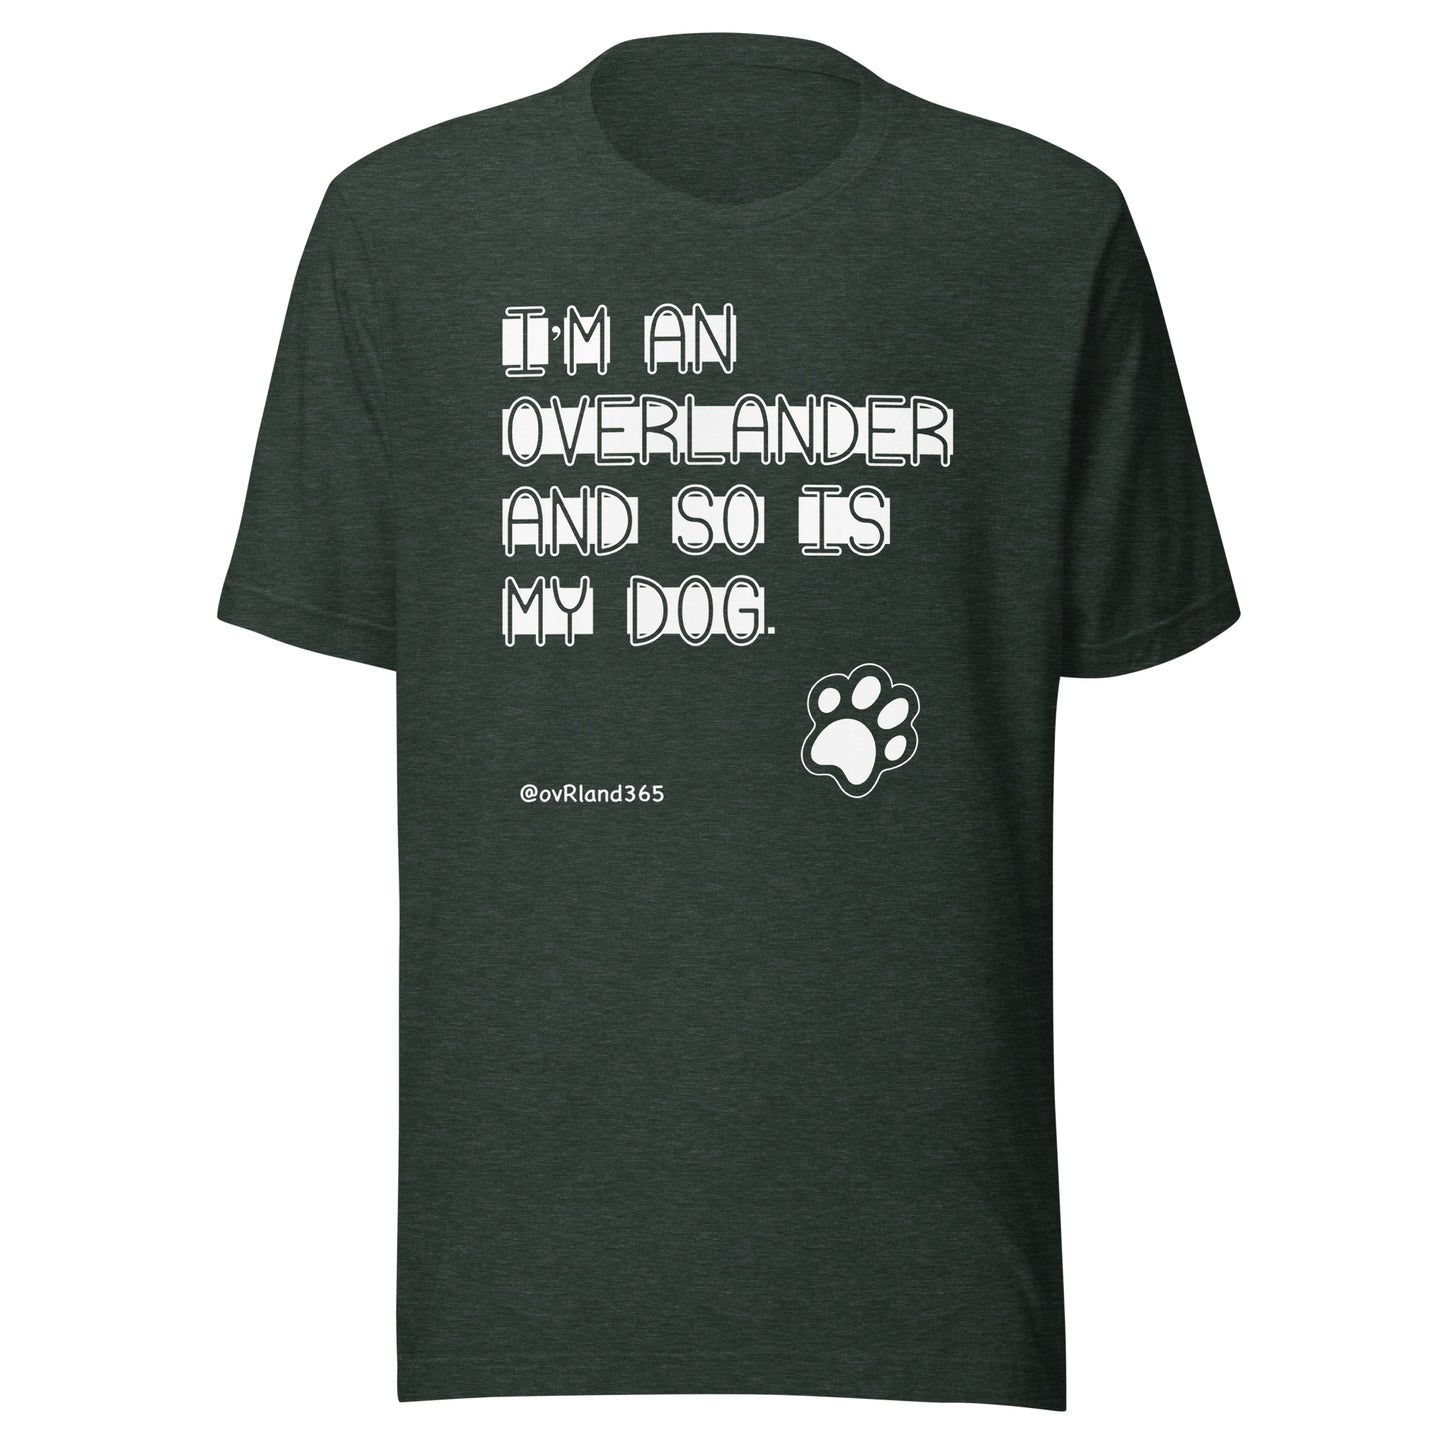 I'm an overlander and so is my dog. Forest t-shirt with a paw print. overland365.com